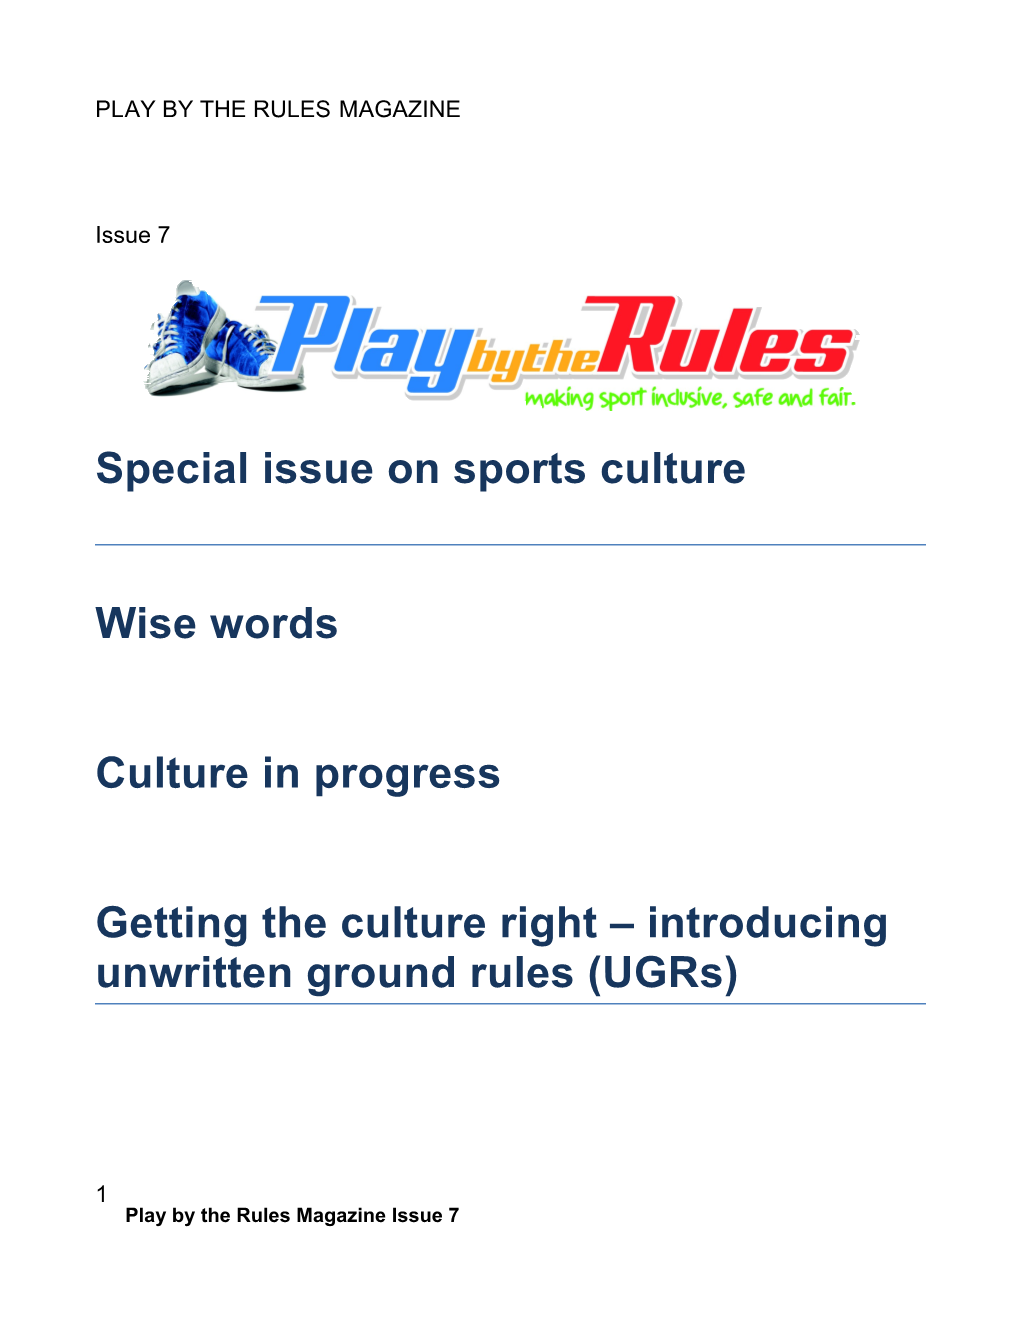 Special Issue on Sports Culture